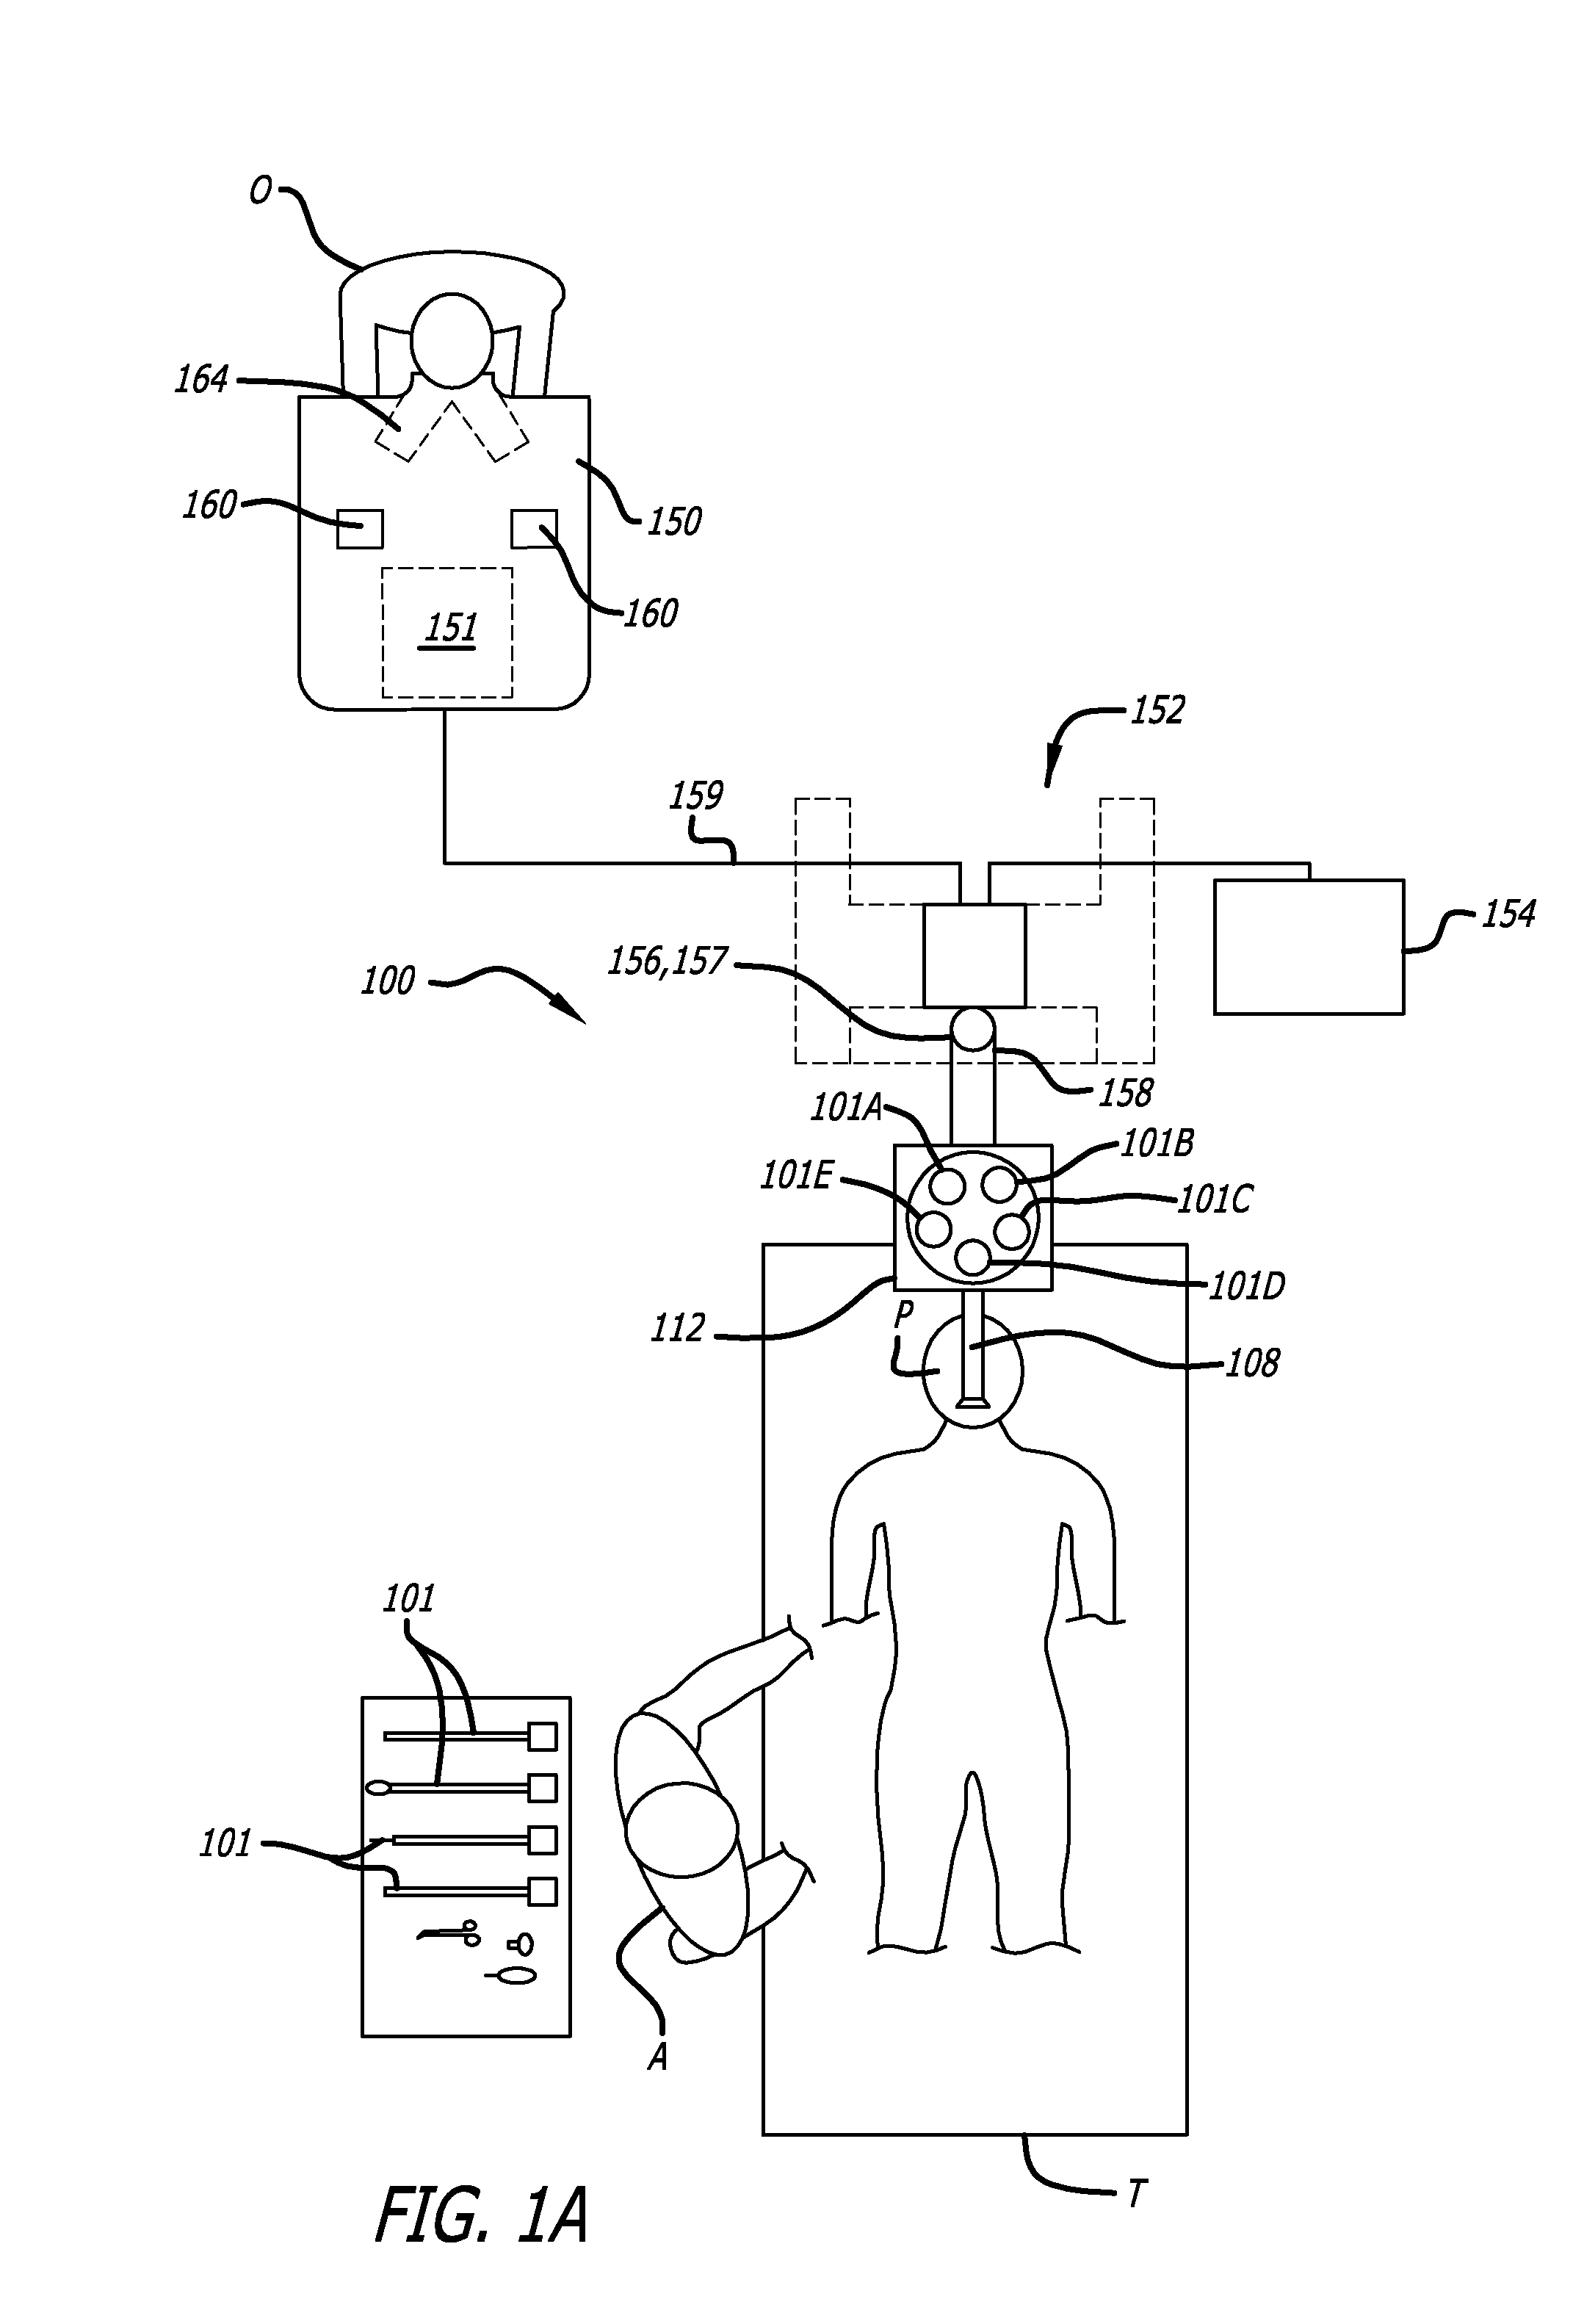 Methods and apparatus to shape flexible entry guides for minimally invasive surgery